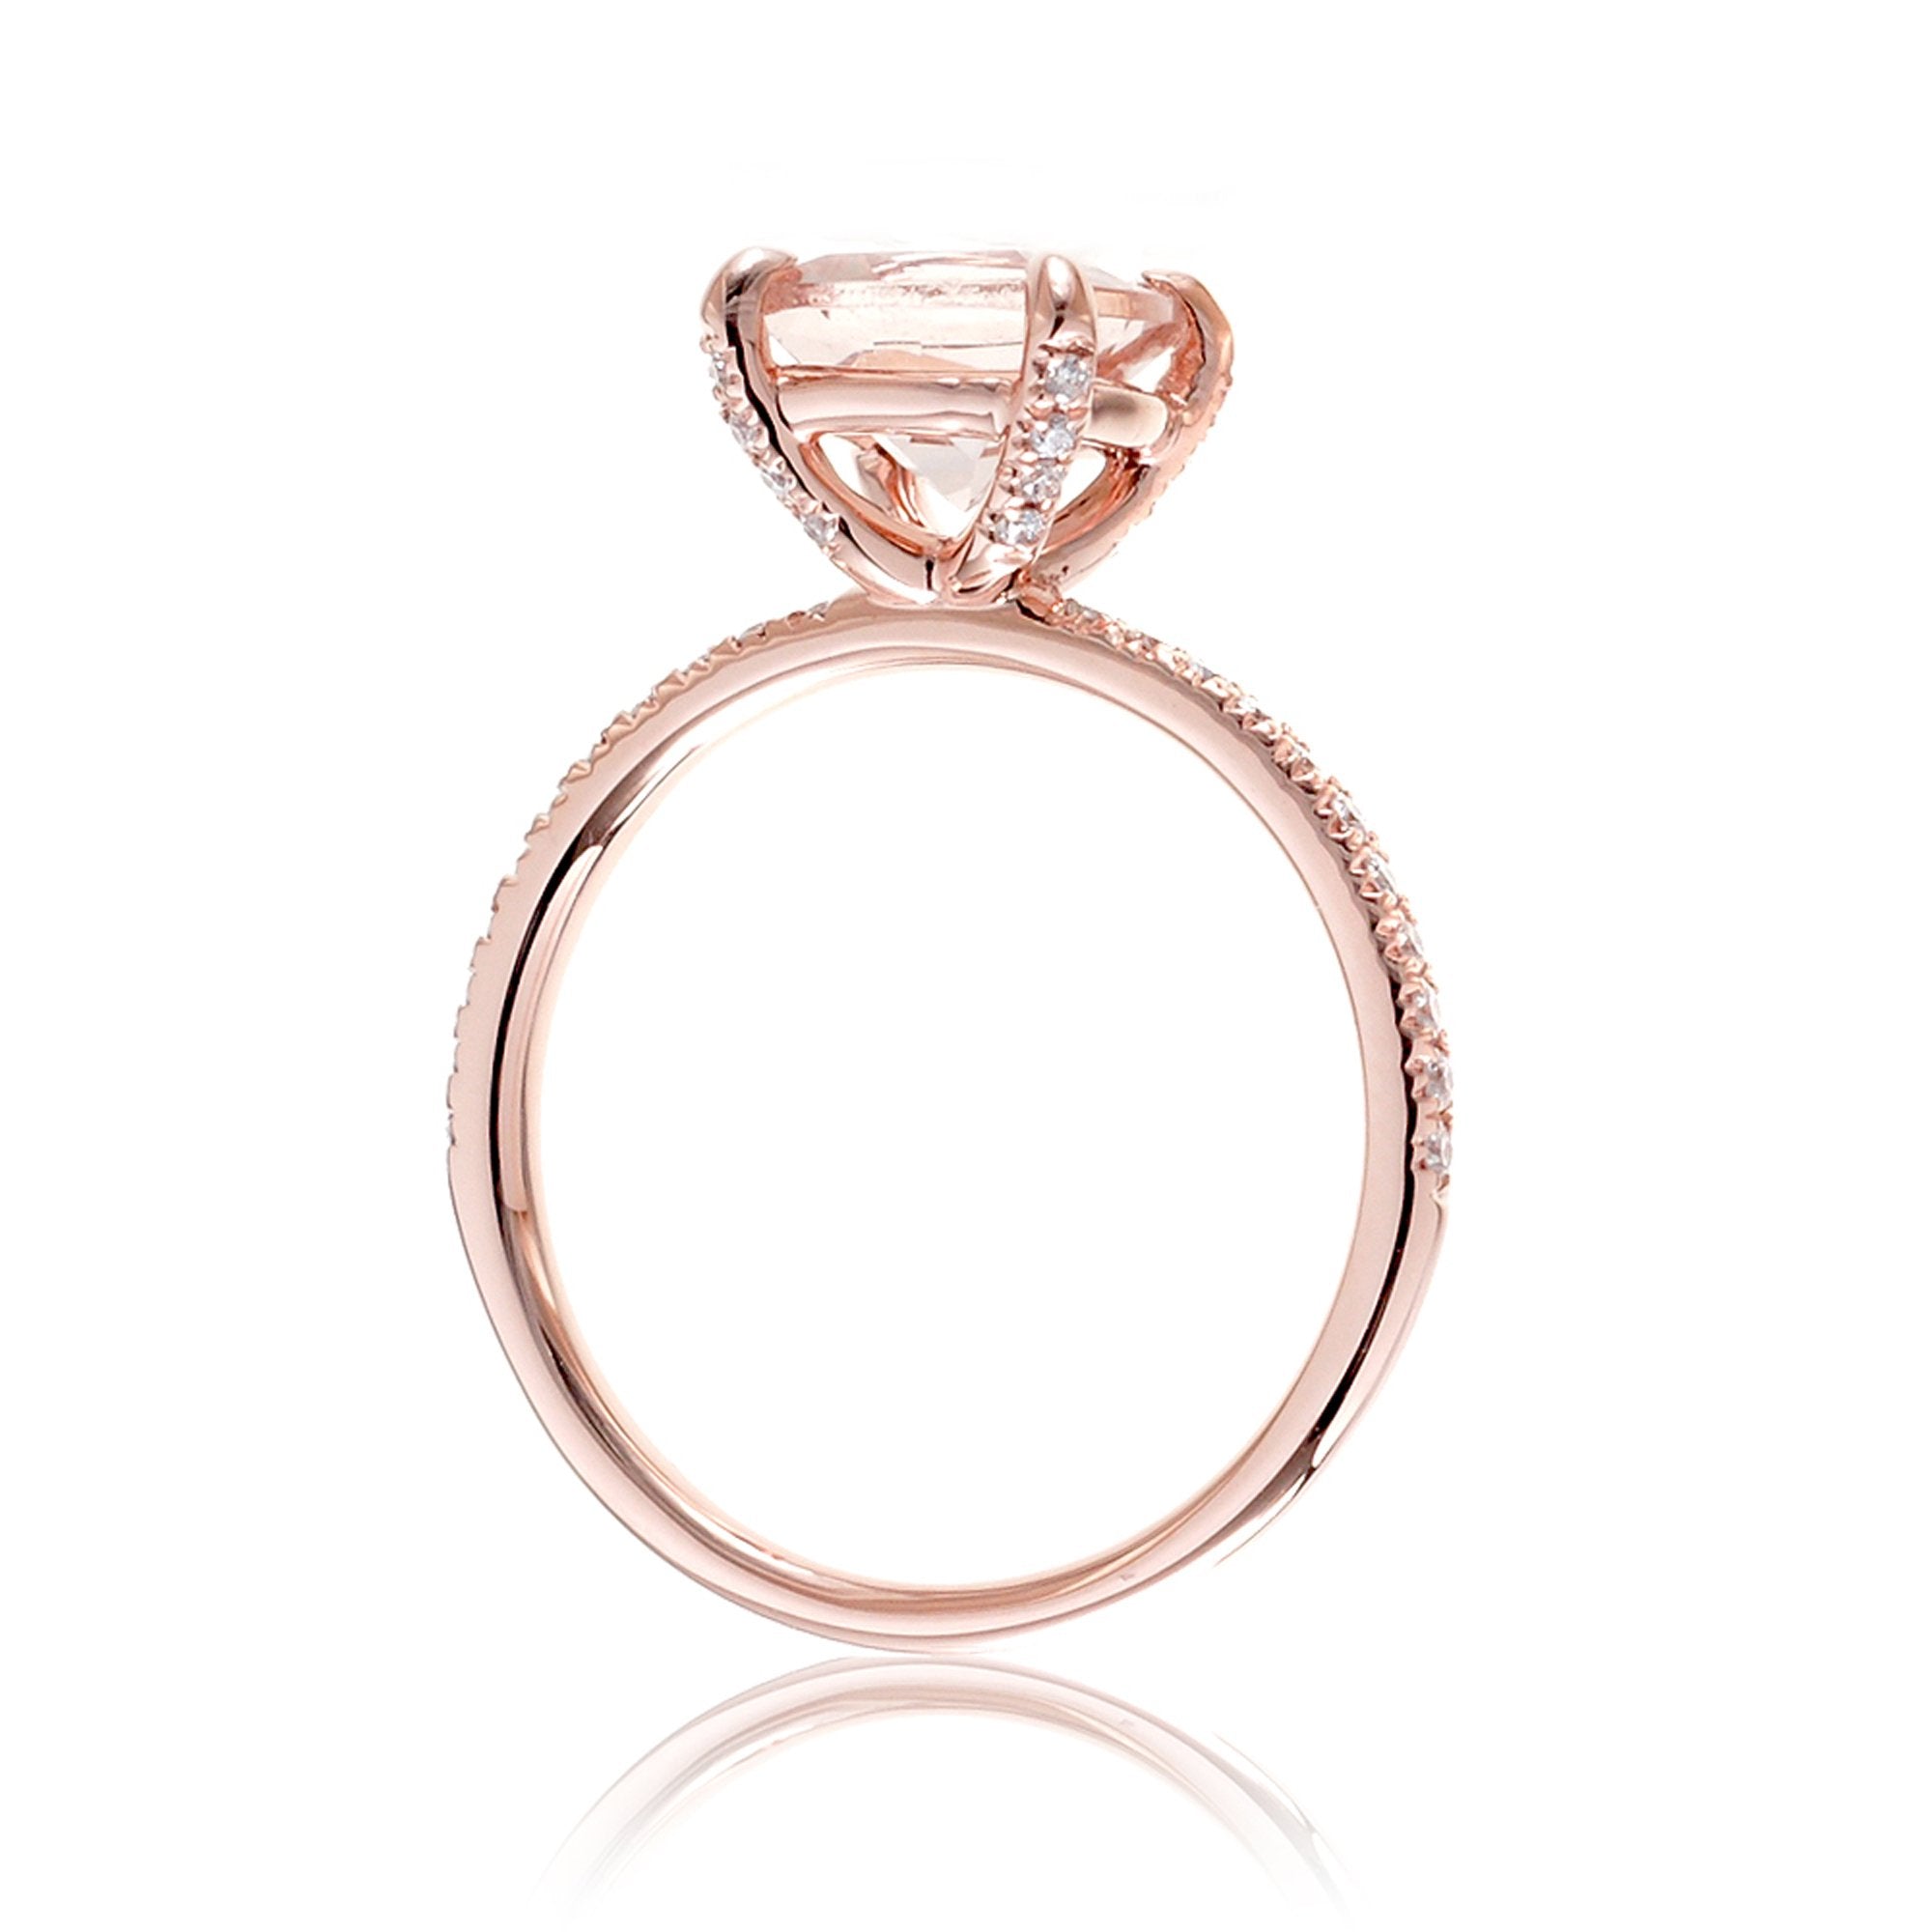 Square cushion morganite diamond band ring in rose gold - The Ava